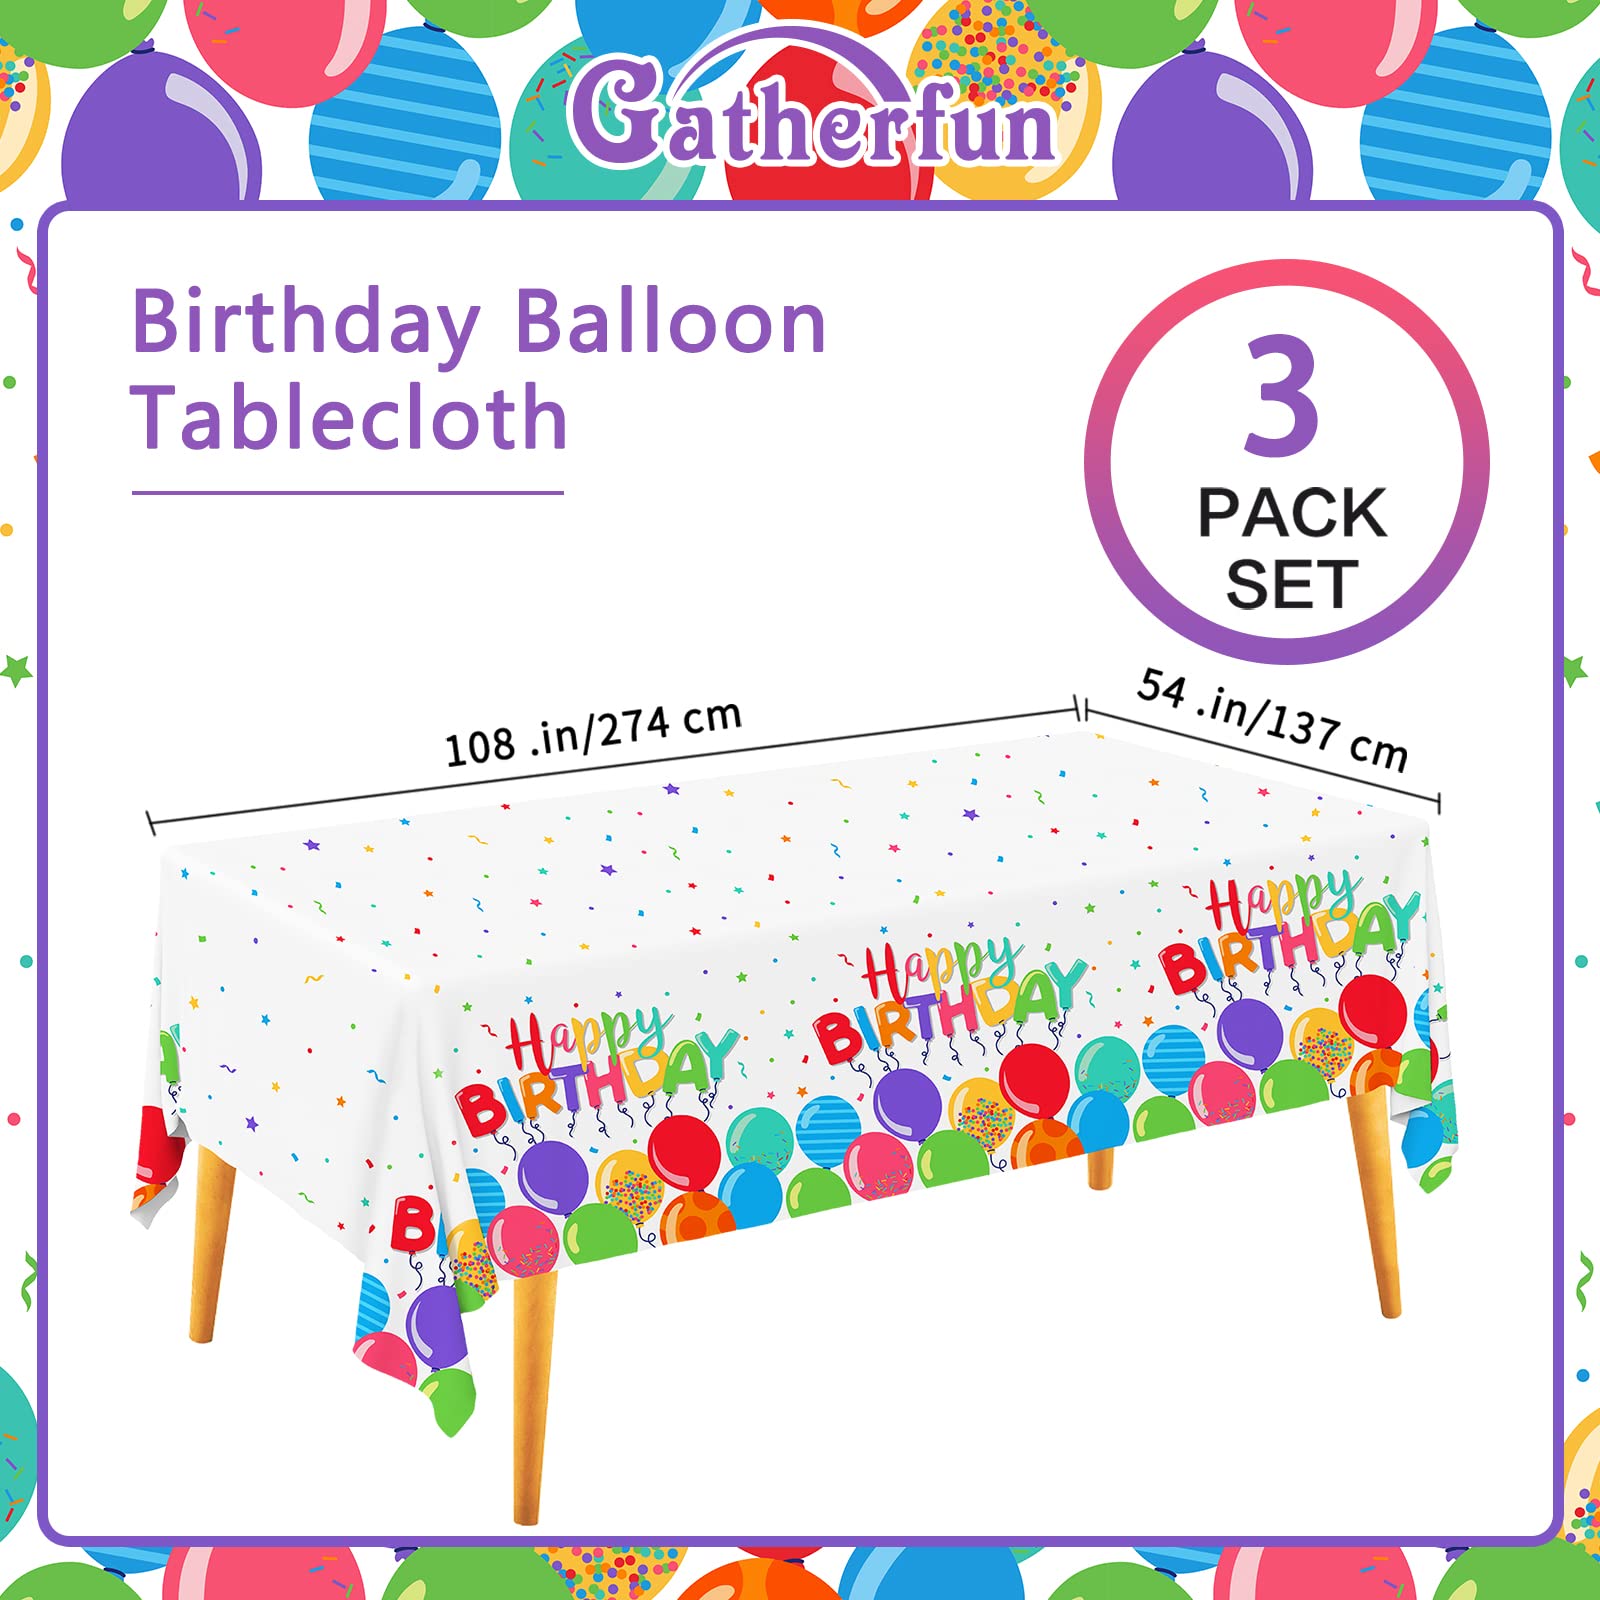 Gatherfun Birthday Disposable Tablecloth, Plastic Table Cover for Kid’s Birthday Party, 54”x108”, 3 PCS